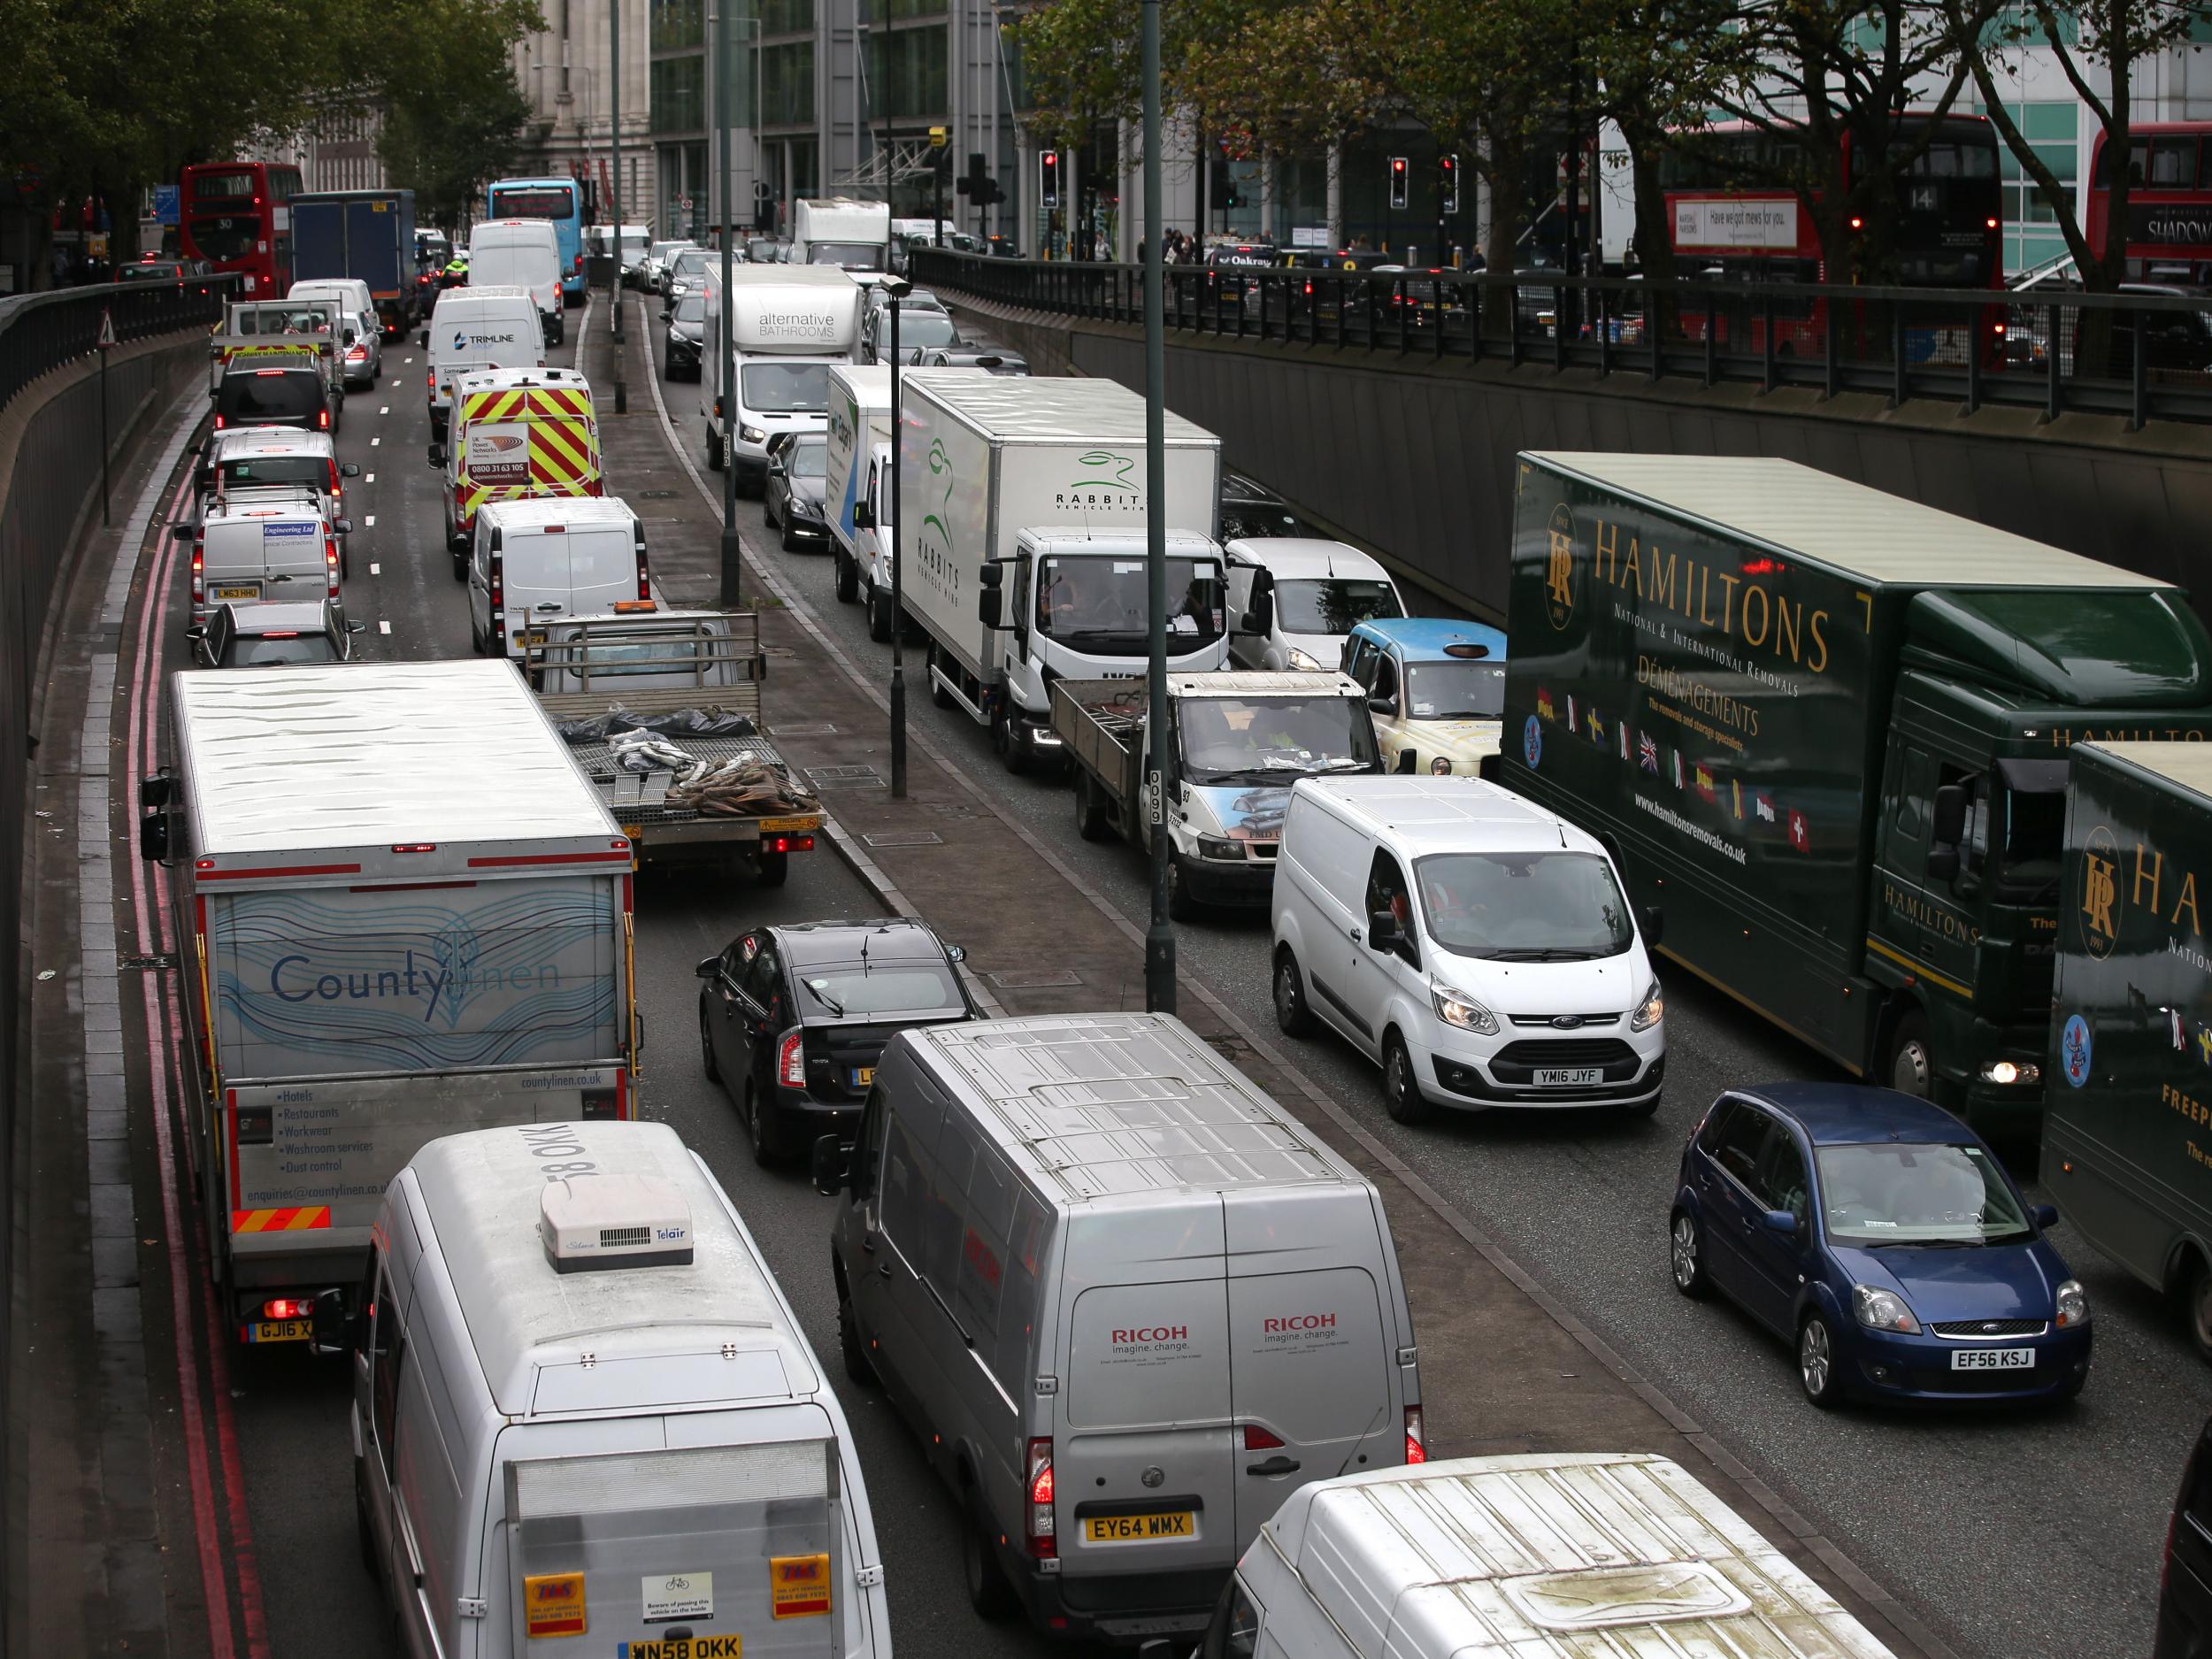 Transport emissions have only decreased by 2 per cent since 1990, making it the worst performing sector for greenhouse gas reductions